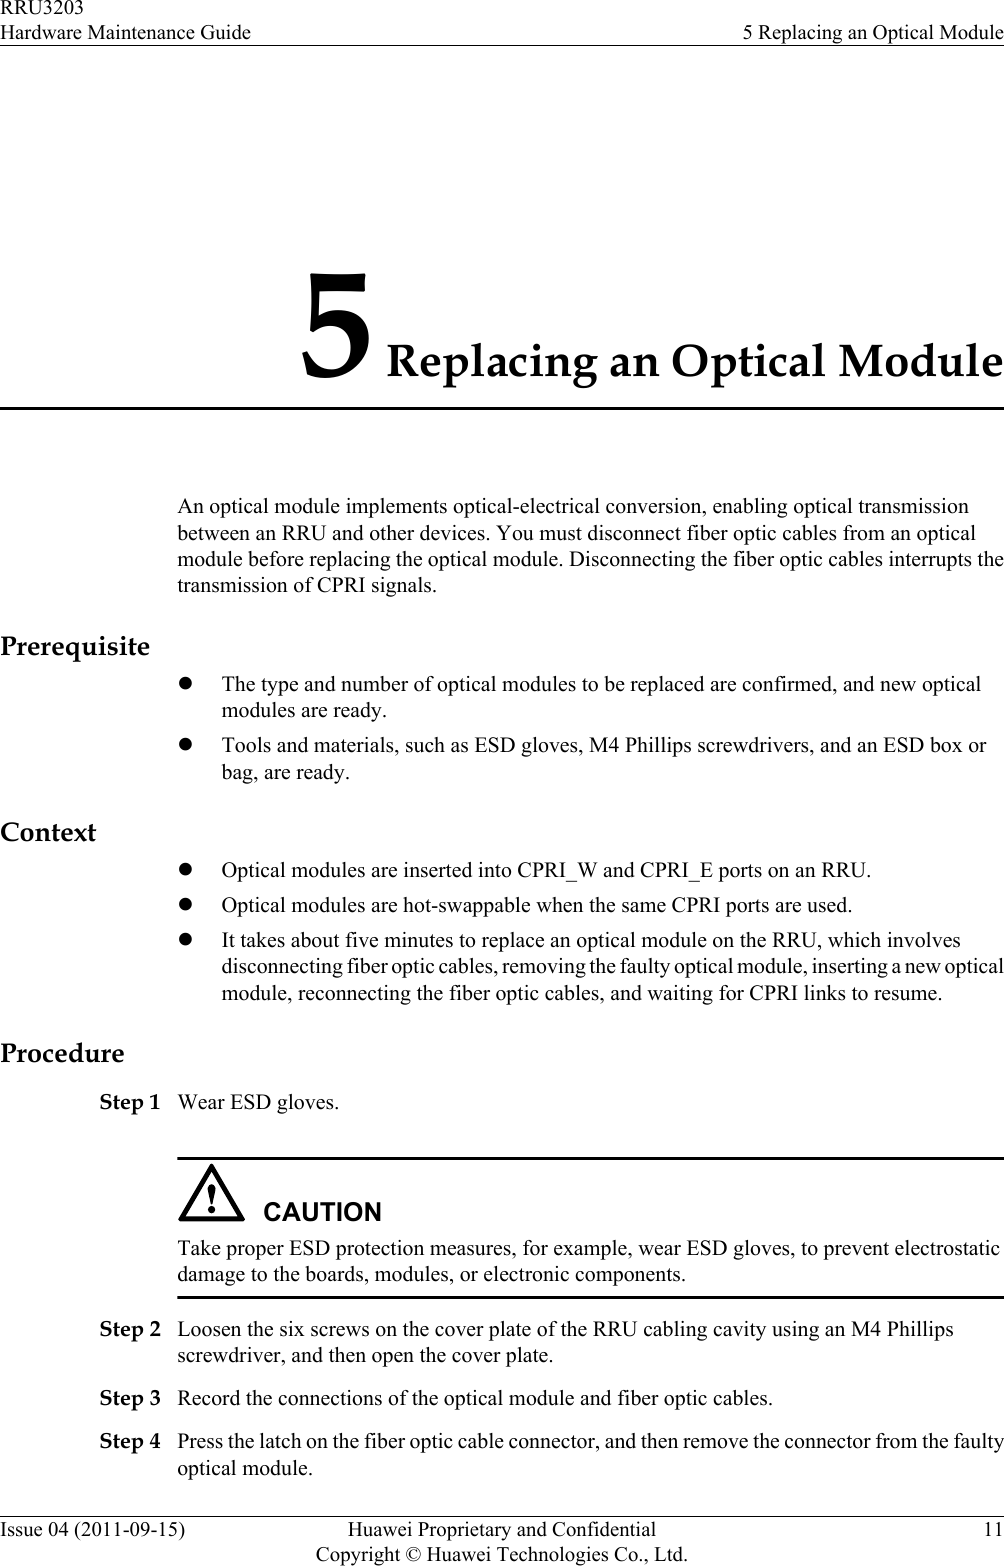 5 Replacing an Optical ModuleAn optical module implements optical-electrical conversion, enabling optical transmissionbetween an RRU and other devices. You must disconnect fiber optic cables from an opticalmodule before replacing the optical module. Disconnecting the fiber optic cables interrupts thetransmission of CPRI signals.PrerequisitelThe type and number of optical modules to be replaced are confirmed, and new opticalmodules are ready.lTools and materials, such as ESD gloves, M4 Phillips screwdrivers, and an ESD box orbag, are ready.ContextlOptical modules are inserted into CPRI_W and CPRI_E ports on an RRU.lOptical modules are hot-swappable when the same CPRI ports are used.lIt takes about five minutes to replace an optical module on the RRU, which involvesdisconnecting fiber optic cables, removing the faulty optical module, inserting a new opticalmodule, reconnecting the fiber optic cables, and waiting for CPRI links to resume.ProcedureStep 1 Wear ESD gloves.CAUTIONTake proper ESD protection measures, for example, wear ESD gloves, to prevent electrostaticdamage to the boards, modules, or electronic components.Step 2 Loosen the six screws on the cover plate of the RRU cabling cavity using an M4 Phillipsscrewdriver, and then open the cover plate.Step 3 Record the connections of the optical module and fiber optic cables.Step 4 Press the latch on the fiber optic cable connector, and then remove the connector from the faultyoptical module.RRU3203Hardware Maintenance Guide 5 Replacing an Optical ModuleIssue 04 (2011-09-15) Huawei Proprietary and ConfidentialCopyright © Huawei Technologies Co., Ltd.11